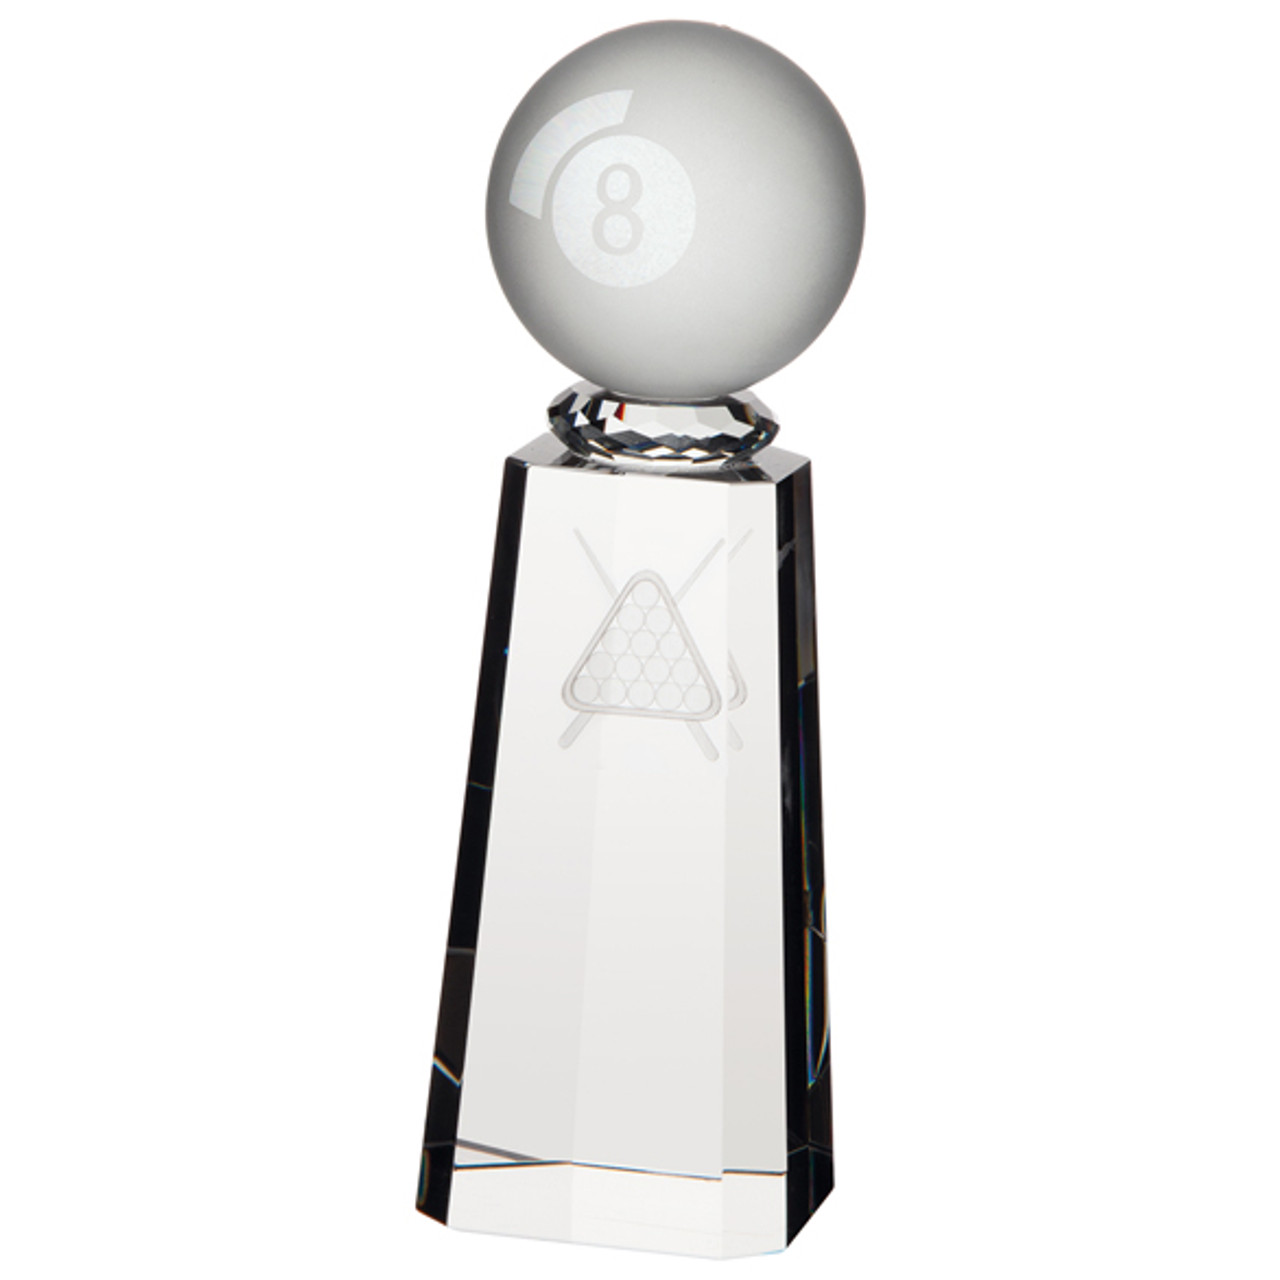 SYNERGY 8 Ball Pool Glass Award With 3D Picture